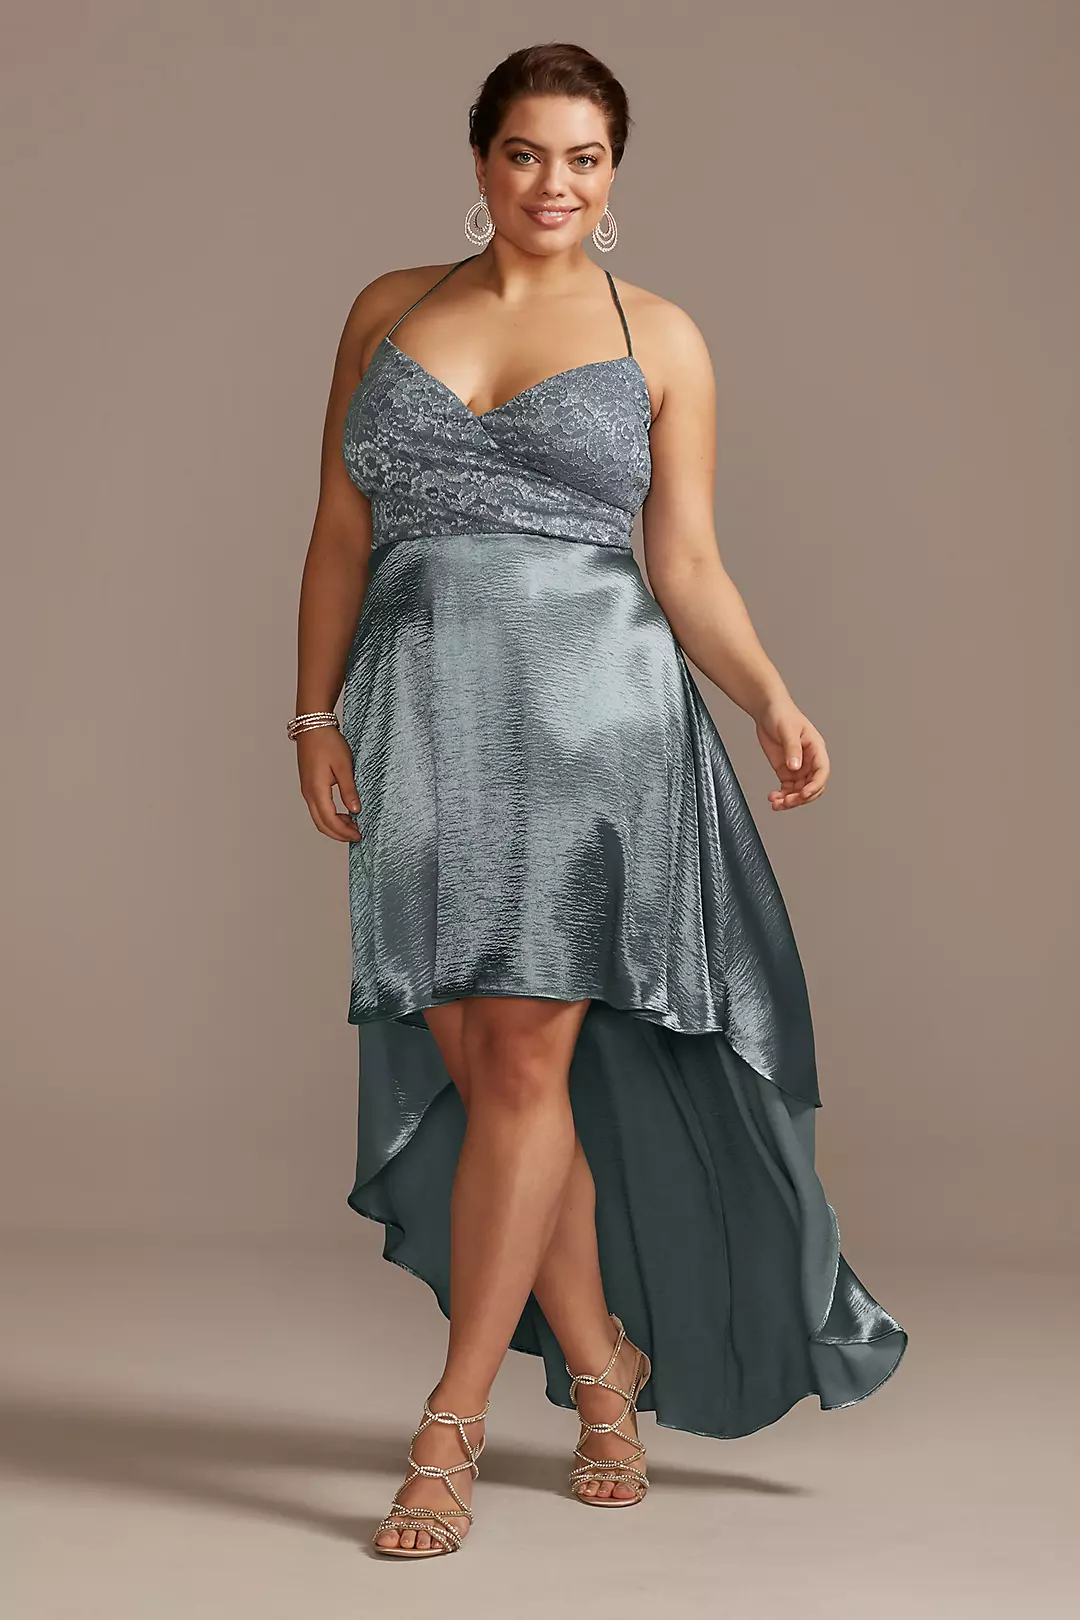 Lace and Brushed Satin High Low Strappy Dress Image